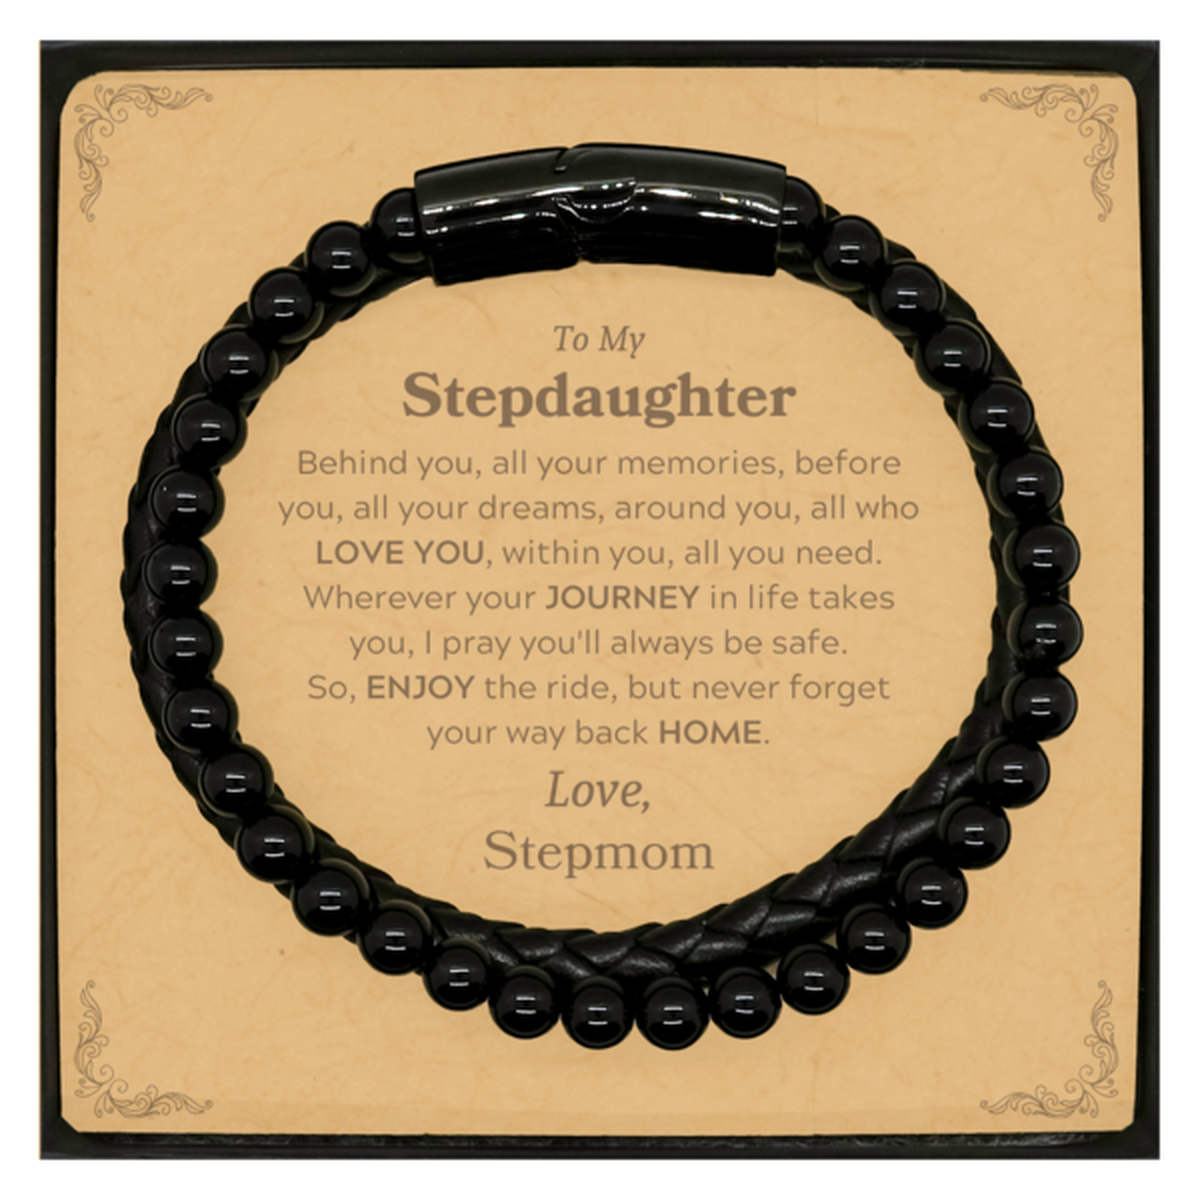 To My Stepdaughter Graduation Gifts from Stepmom, Stepdaughter Stone Leather Bracelets Christmas Birthday Gifts for Stepdaughter Behind you, all your memories, before you, all your dreams. Love, Stepmom